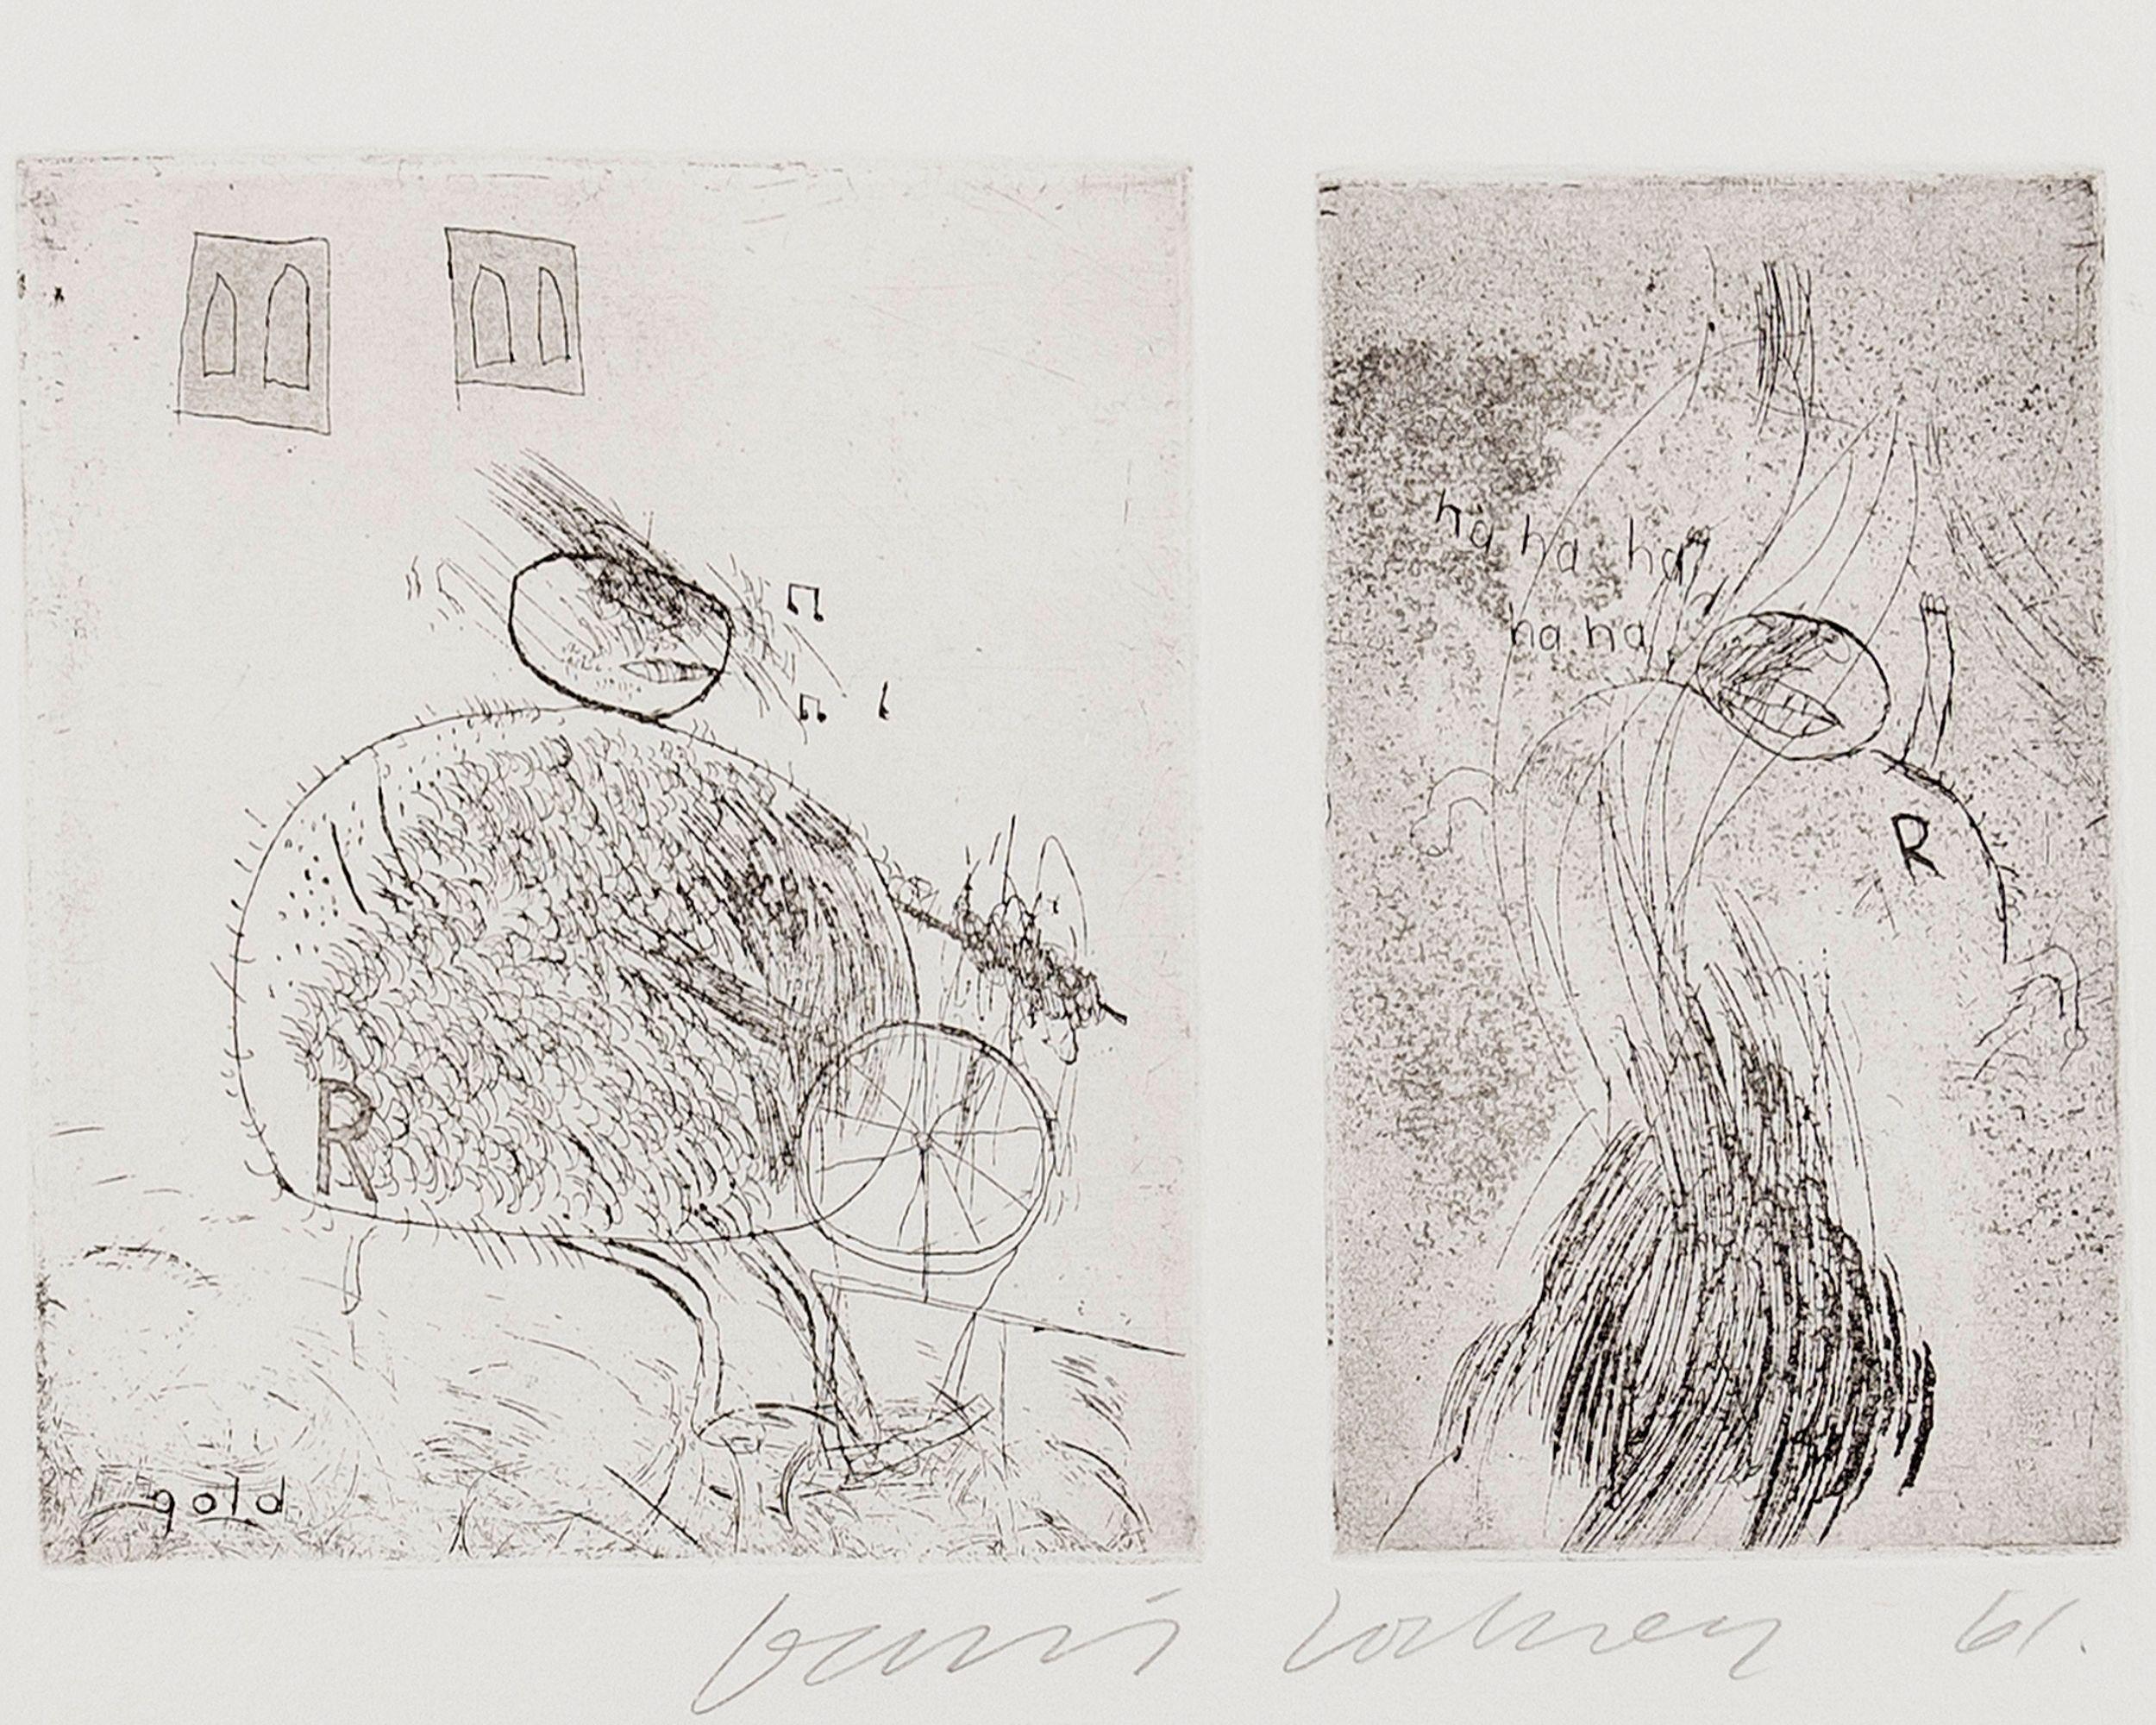 DAVID HOCKNEY
Study for Rumpelstiltskin, 1961
The series of four etchings with aquatint
On one sheet of handmade Crisbrook wove paper
Signed, dated and inscribed A.P.
An artist’s proof apart from the edition of 15
Printed by Maurice Payne,